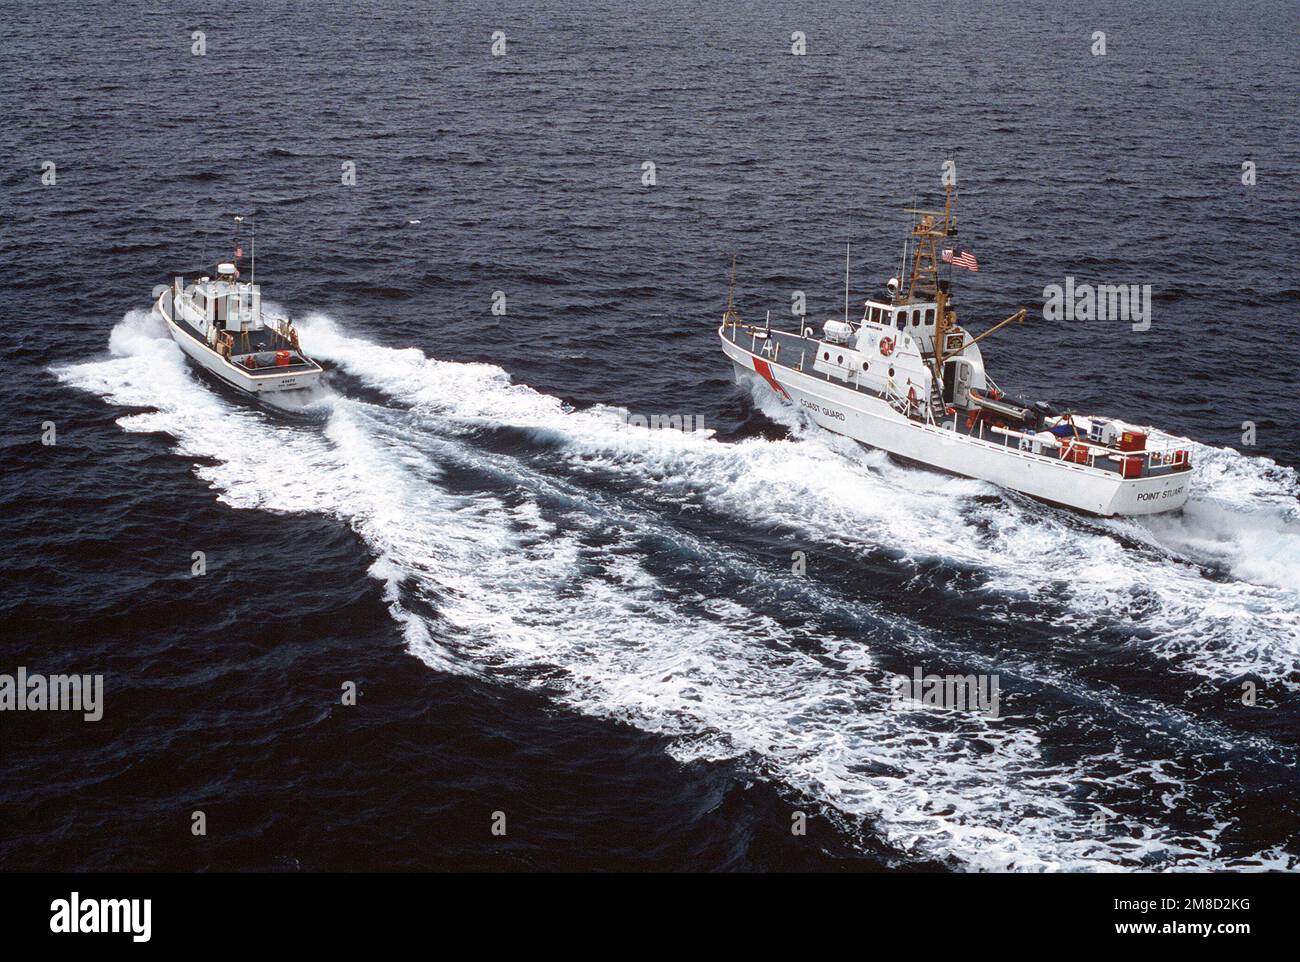 A 41-foot US Coast Guard patrol boat passes the patrol boat USCGC POINT STUART (WPB 82358) during a routine mission. Country: Unknown Stock Photo